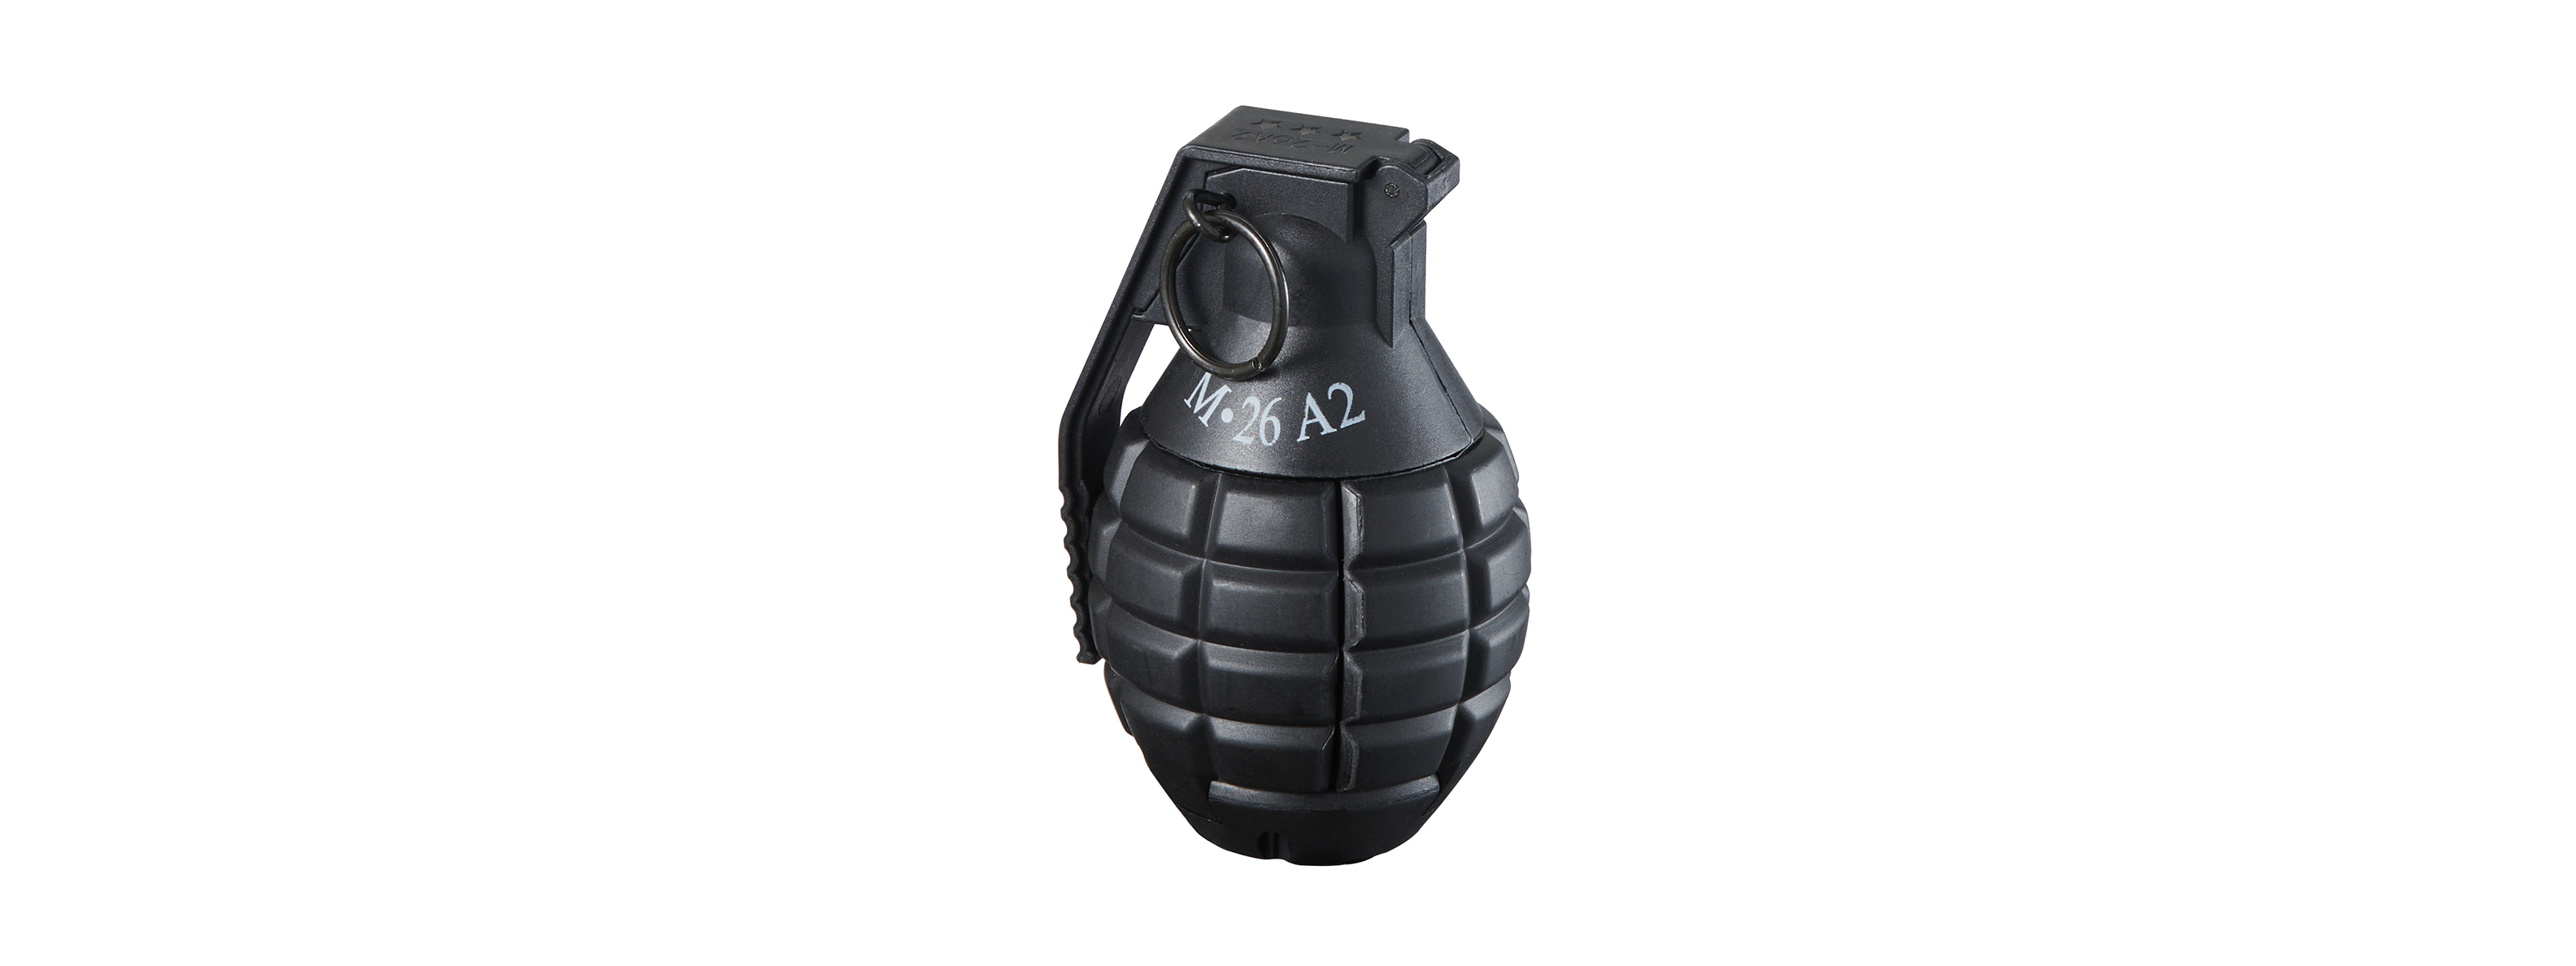 Lancer Tactical M26A2 Spring Powered Impact Airsoft Grenade